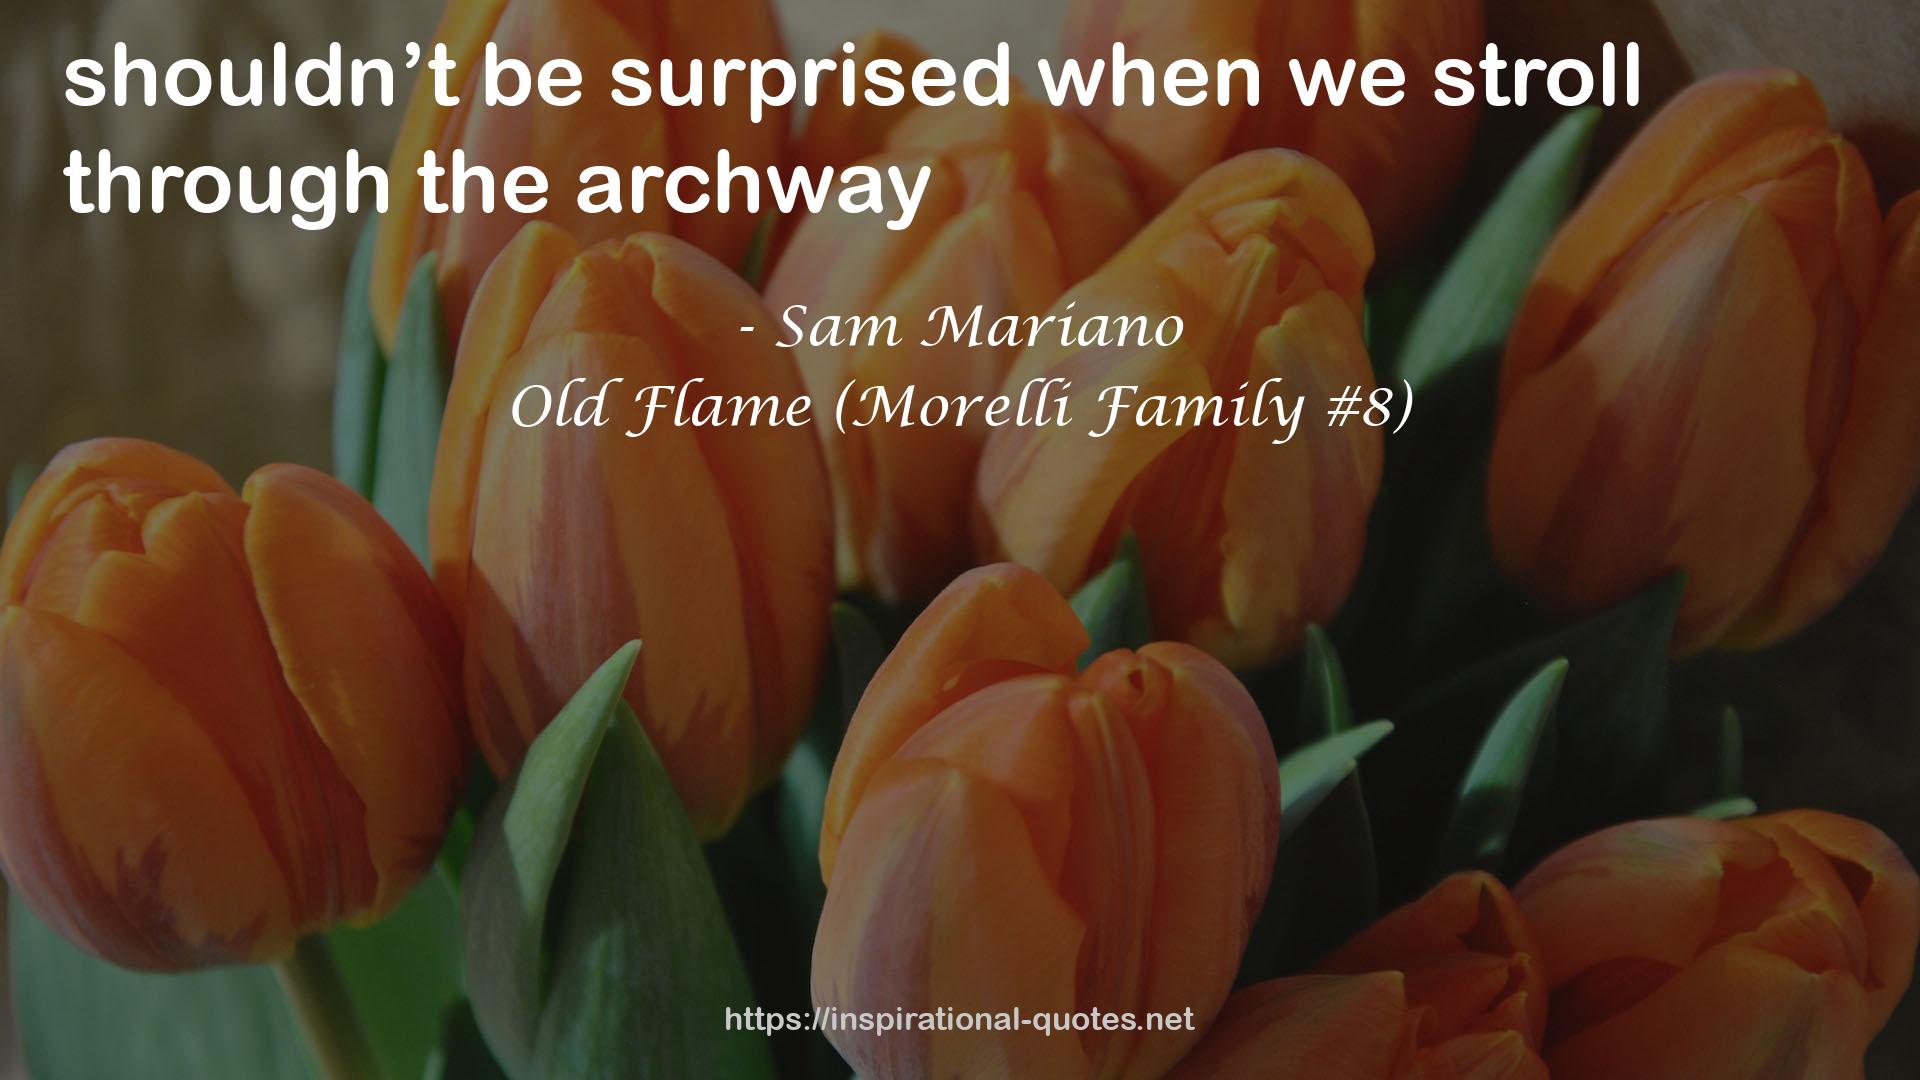 Old Flame (Morelli Family #8) QUOTES